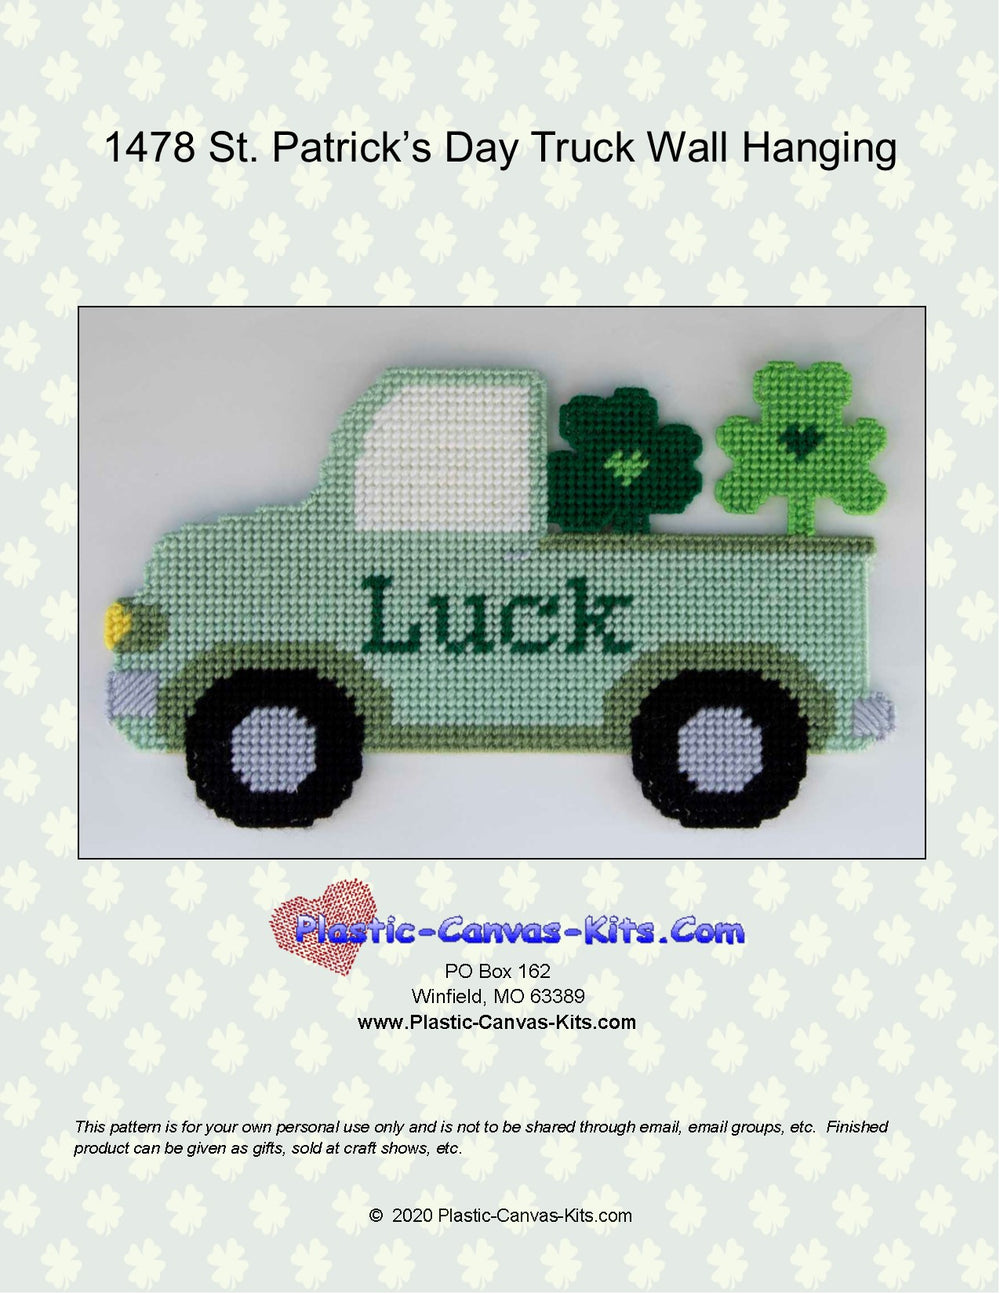 St. Patrick's Day Truck Wall Hanging